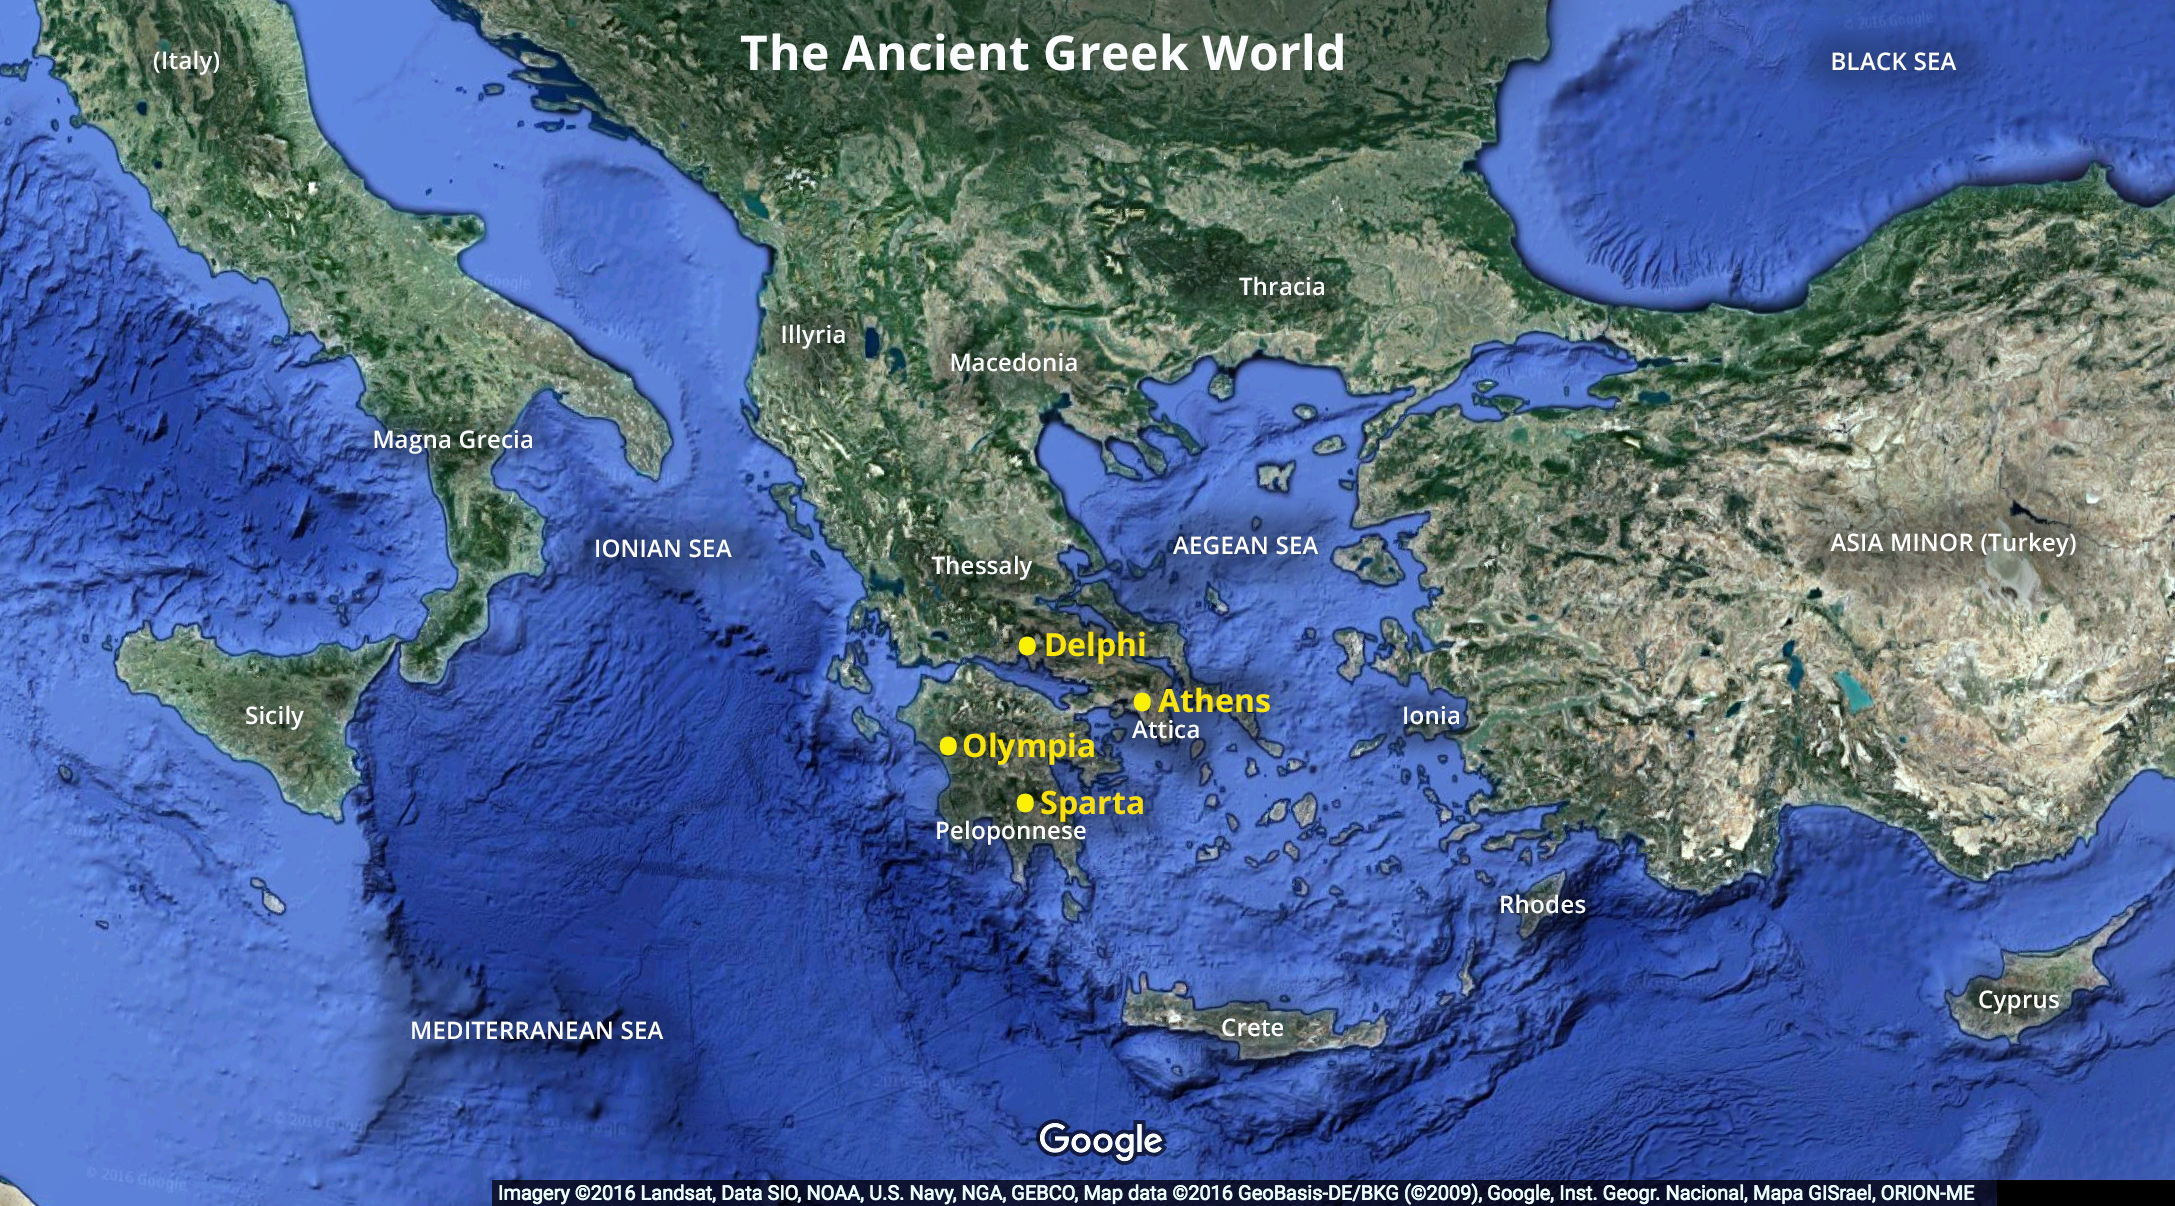 Map of the Ancient Greek World highlighting Delphi, Athens, Olympia, and Sparta